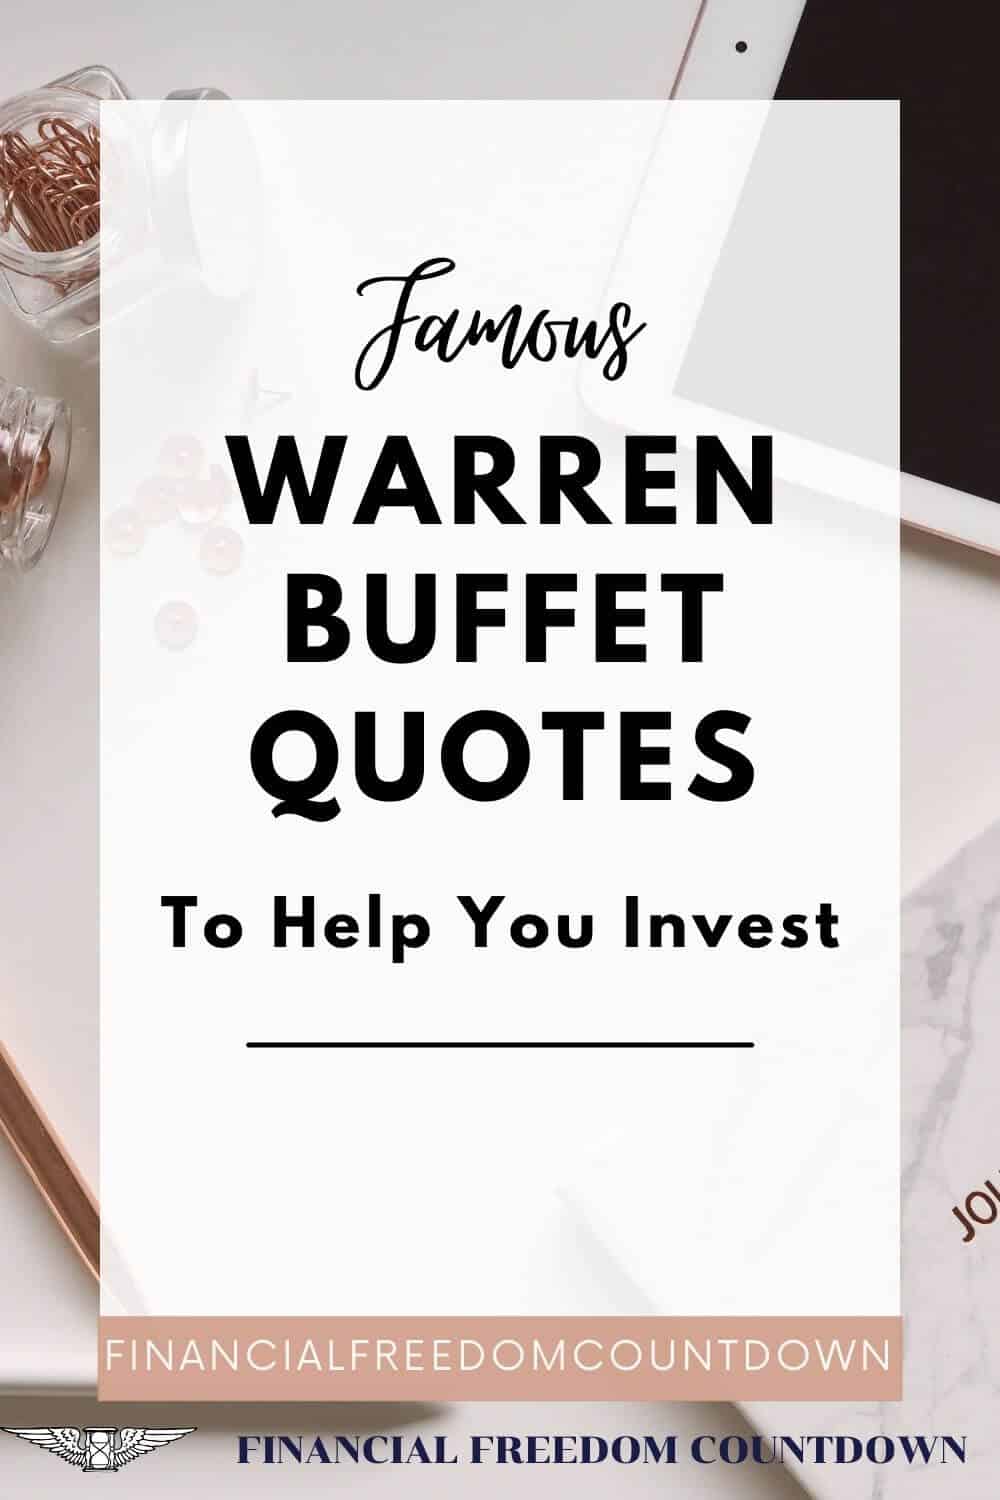 Famous Warren Buffet Quotes To Help You Invest